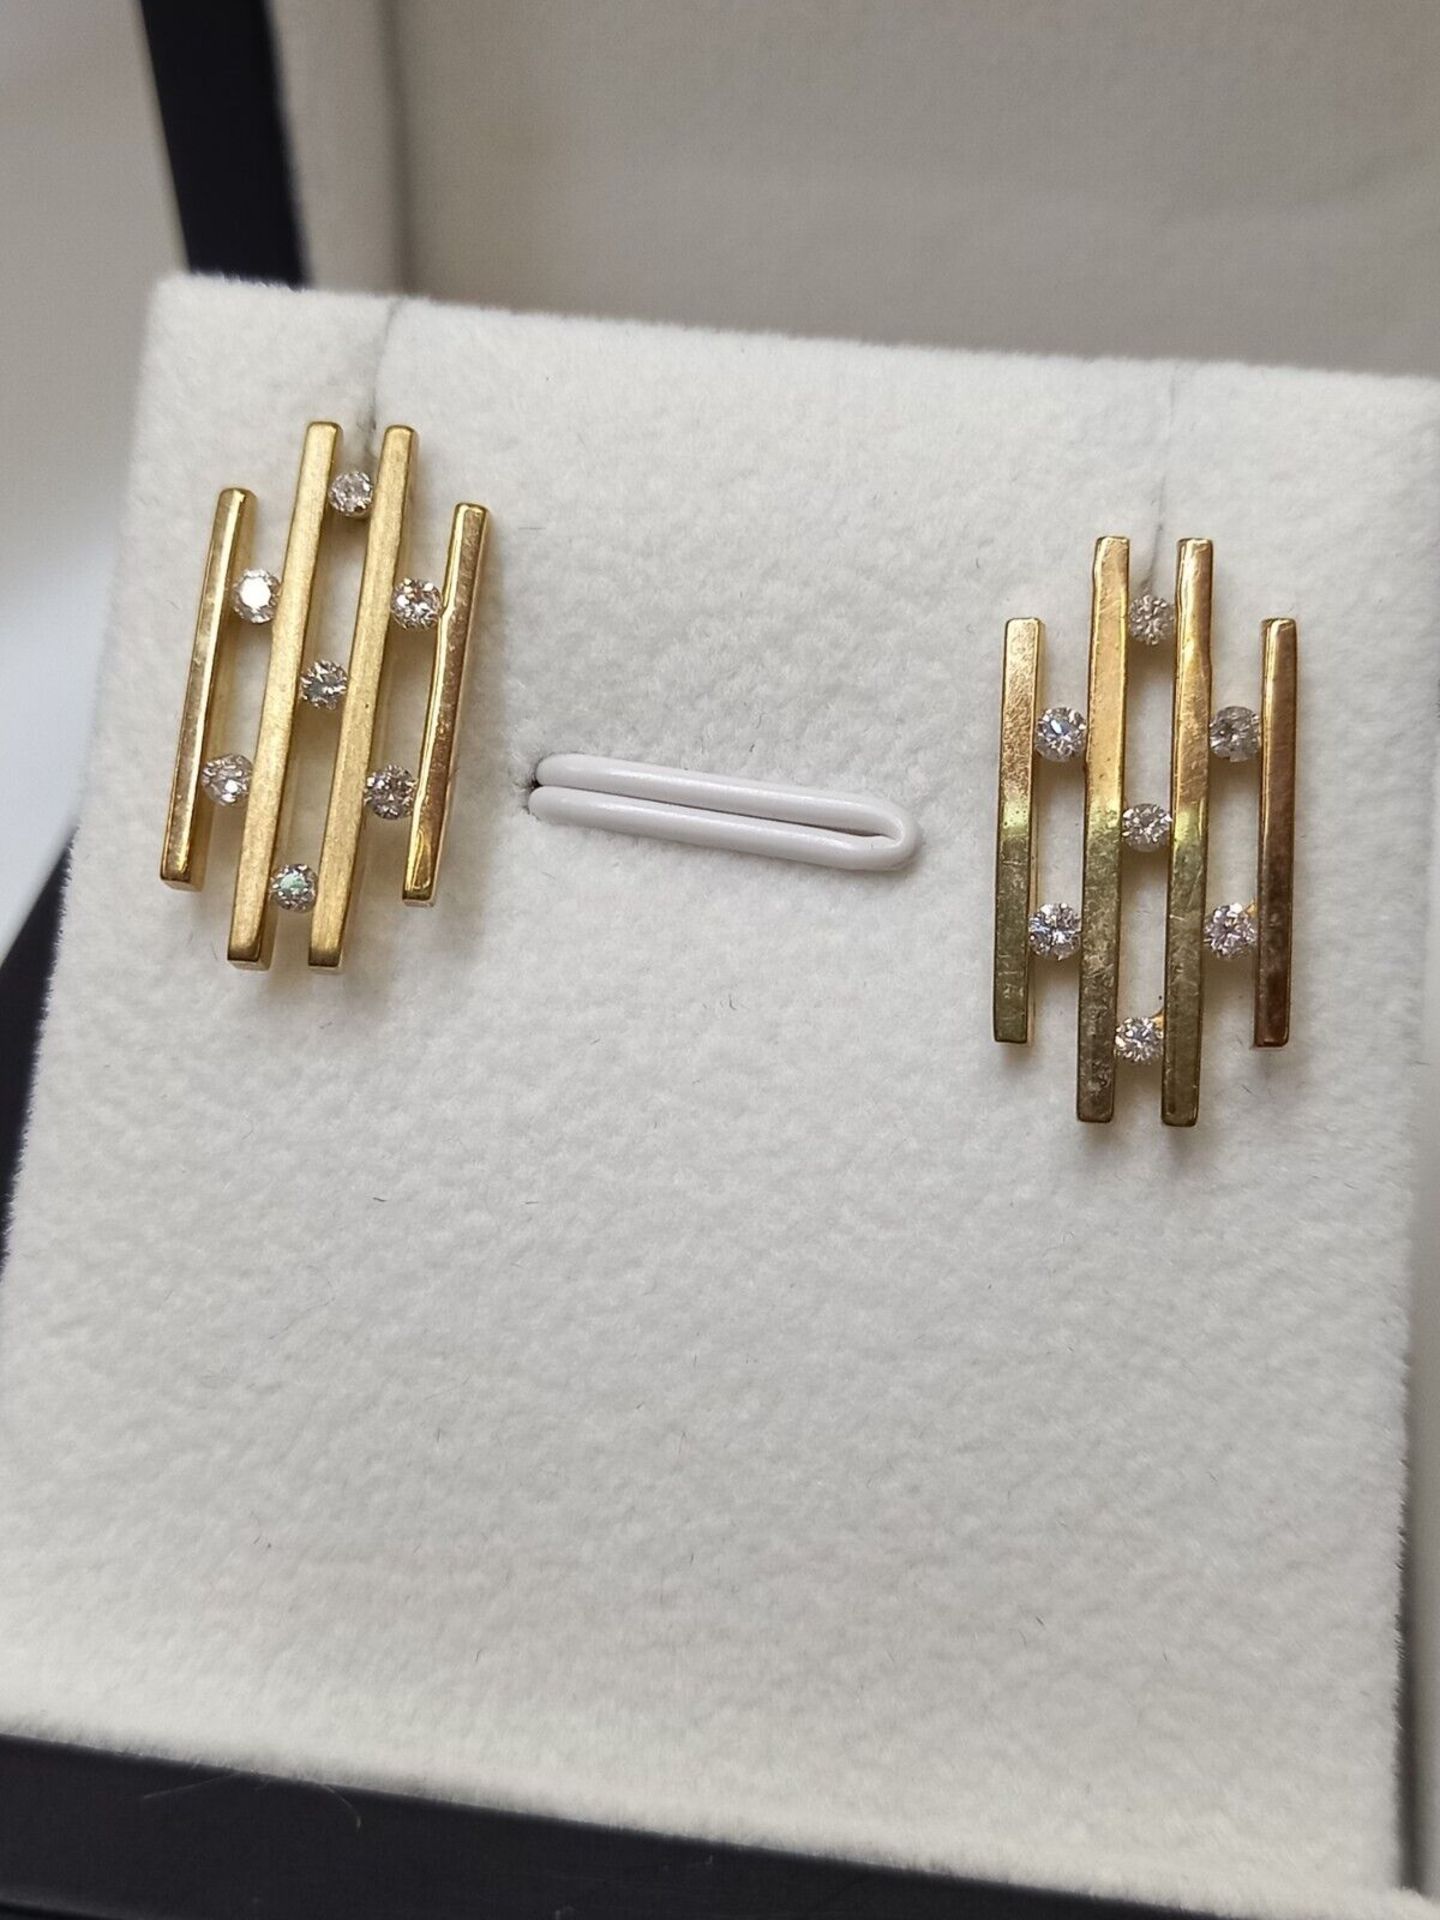 0.30CT DIAMOND EARRING IN SOLID 9CT YELLOW GOLD. IN GIFT BOX + VALUATION CERTIFICATE OF £795 - Image 2 of 5